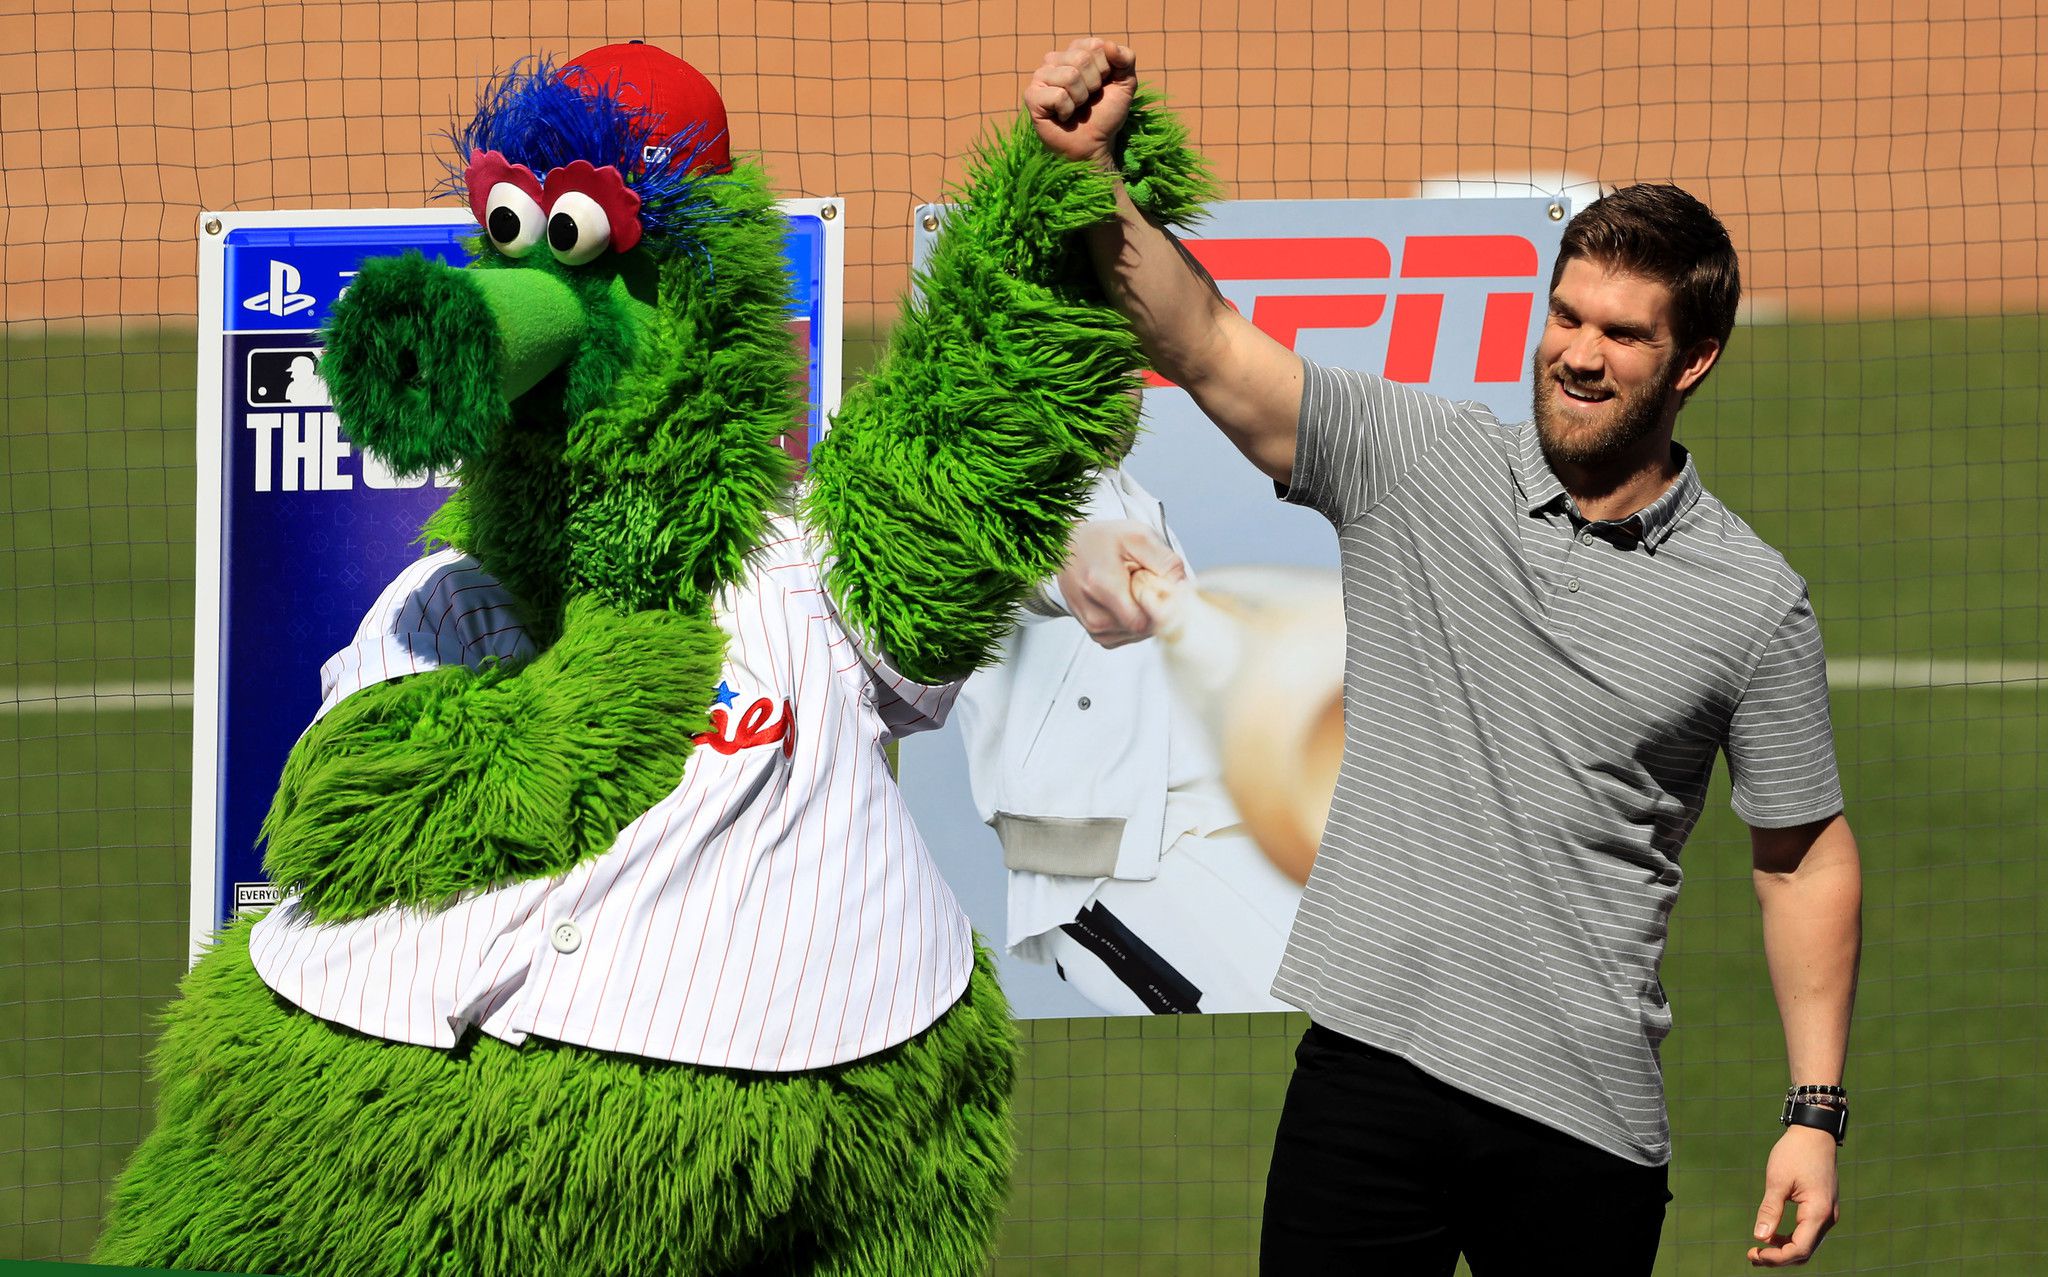 Phillie Phanatic's new look: What do you think?